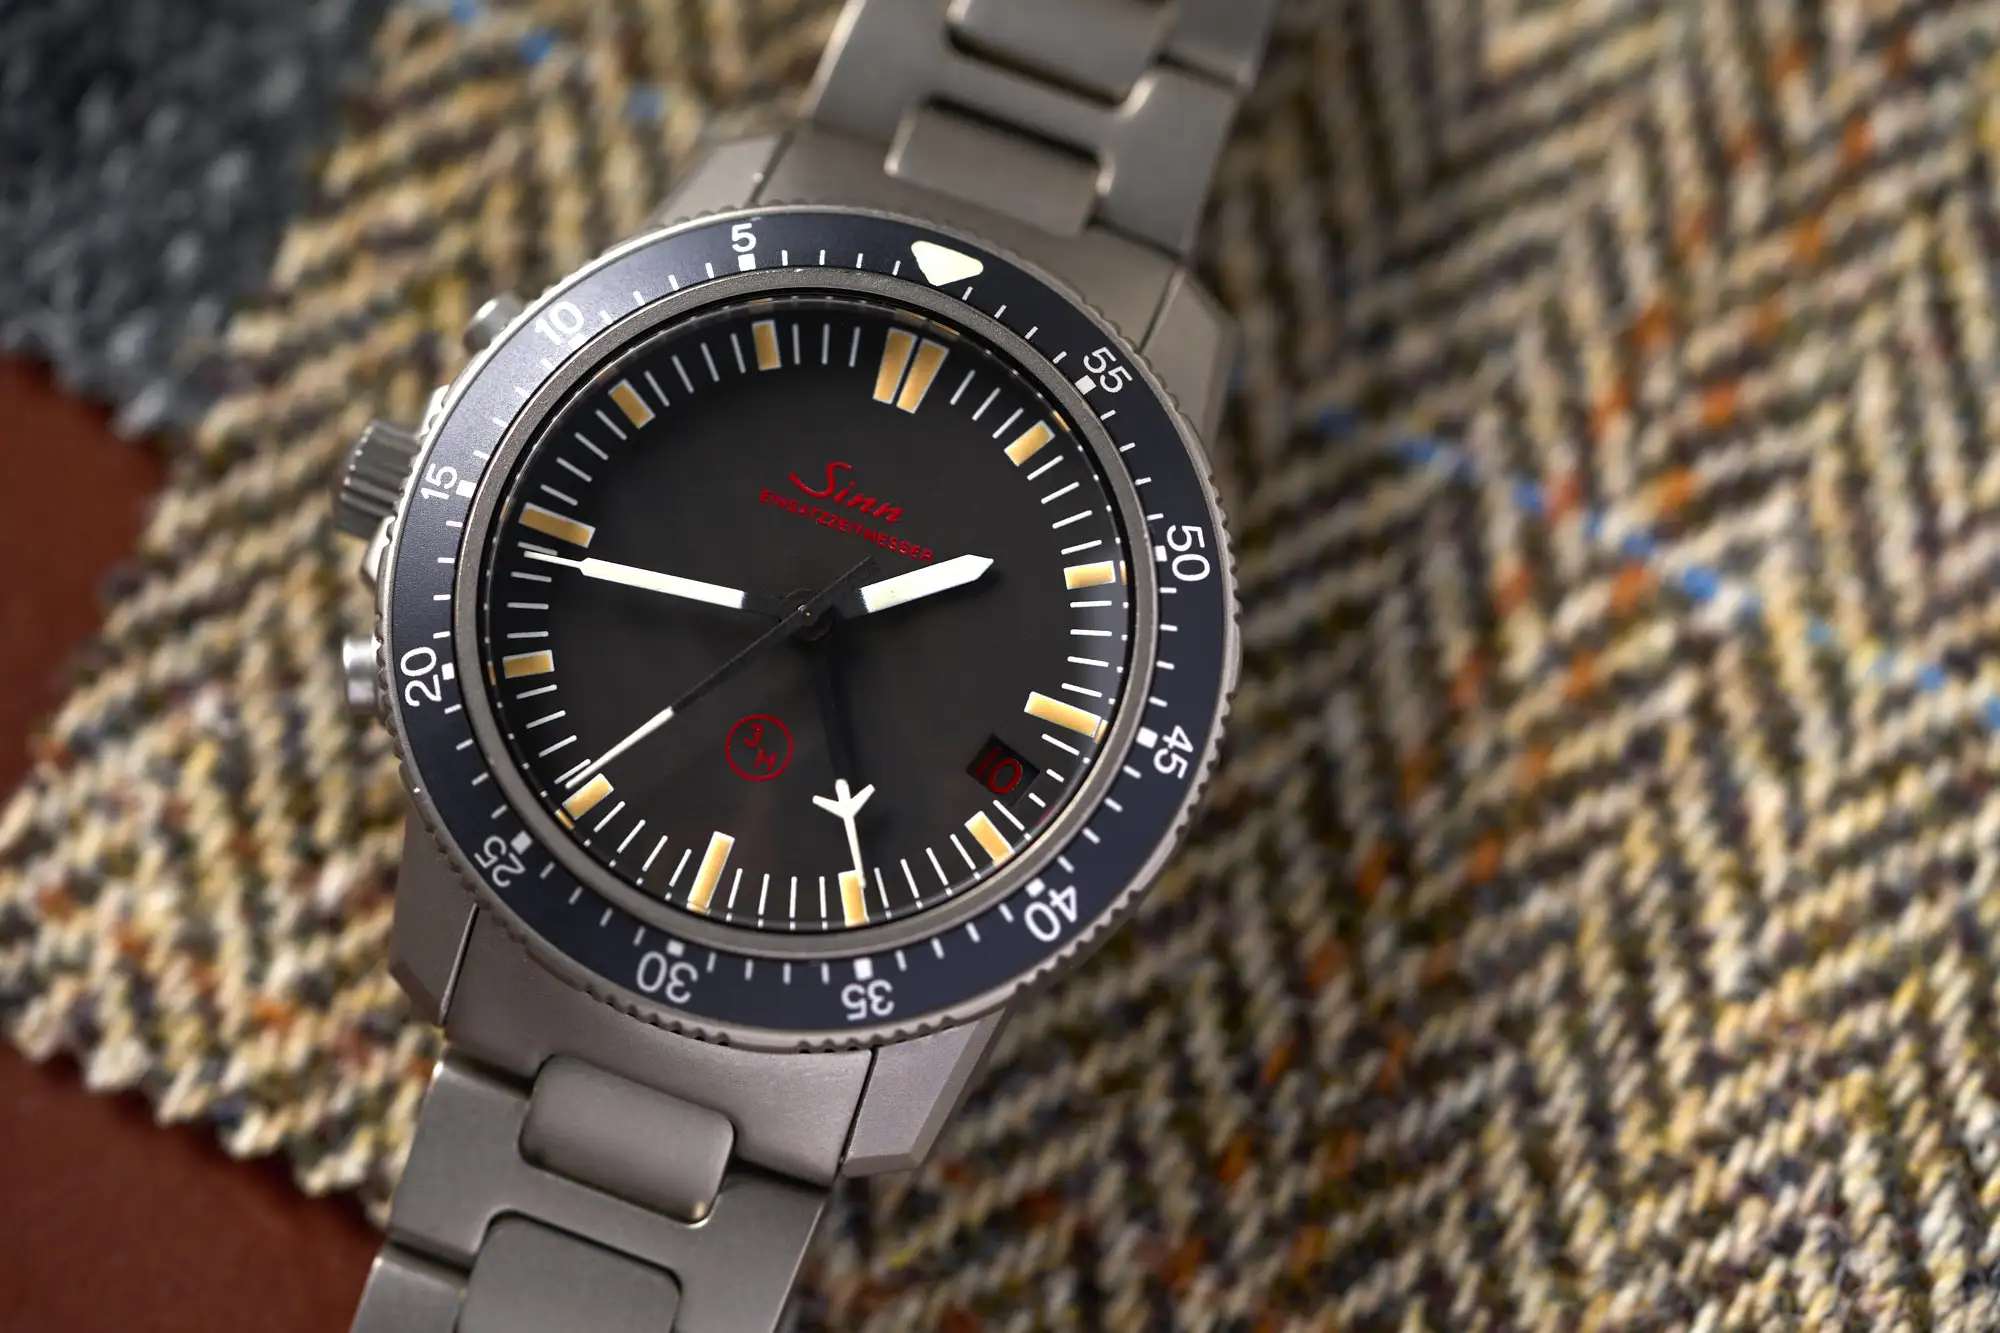 [Video] Missed Review: The Sinn EZM1, The First Mission Timer